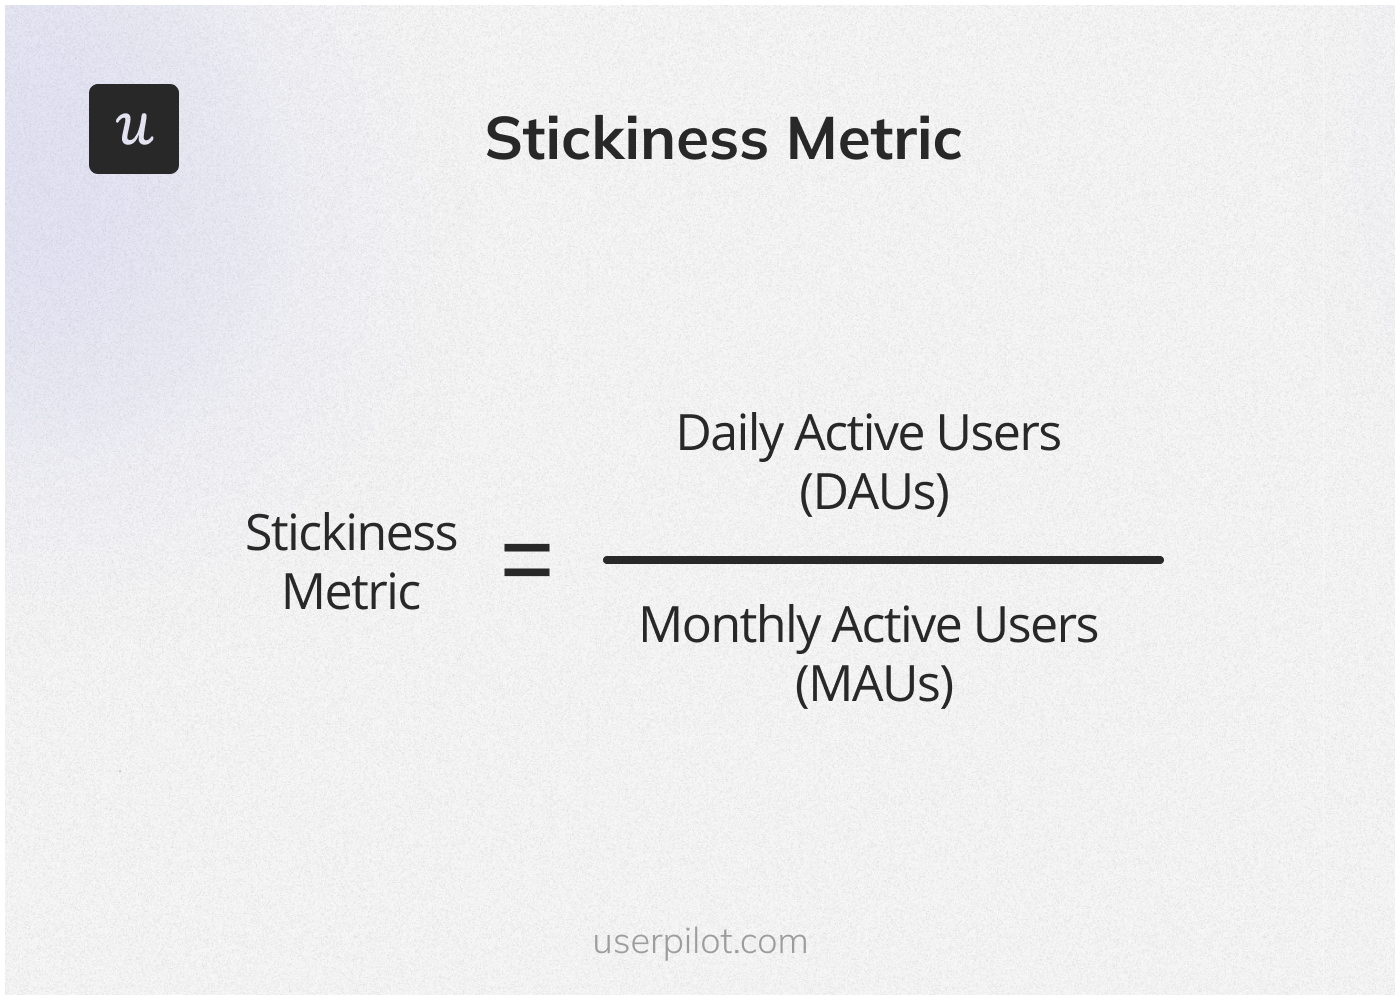 Product stickiness calculation